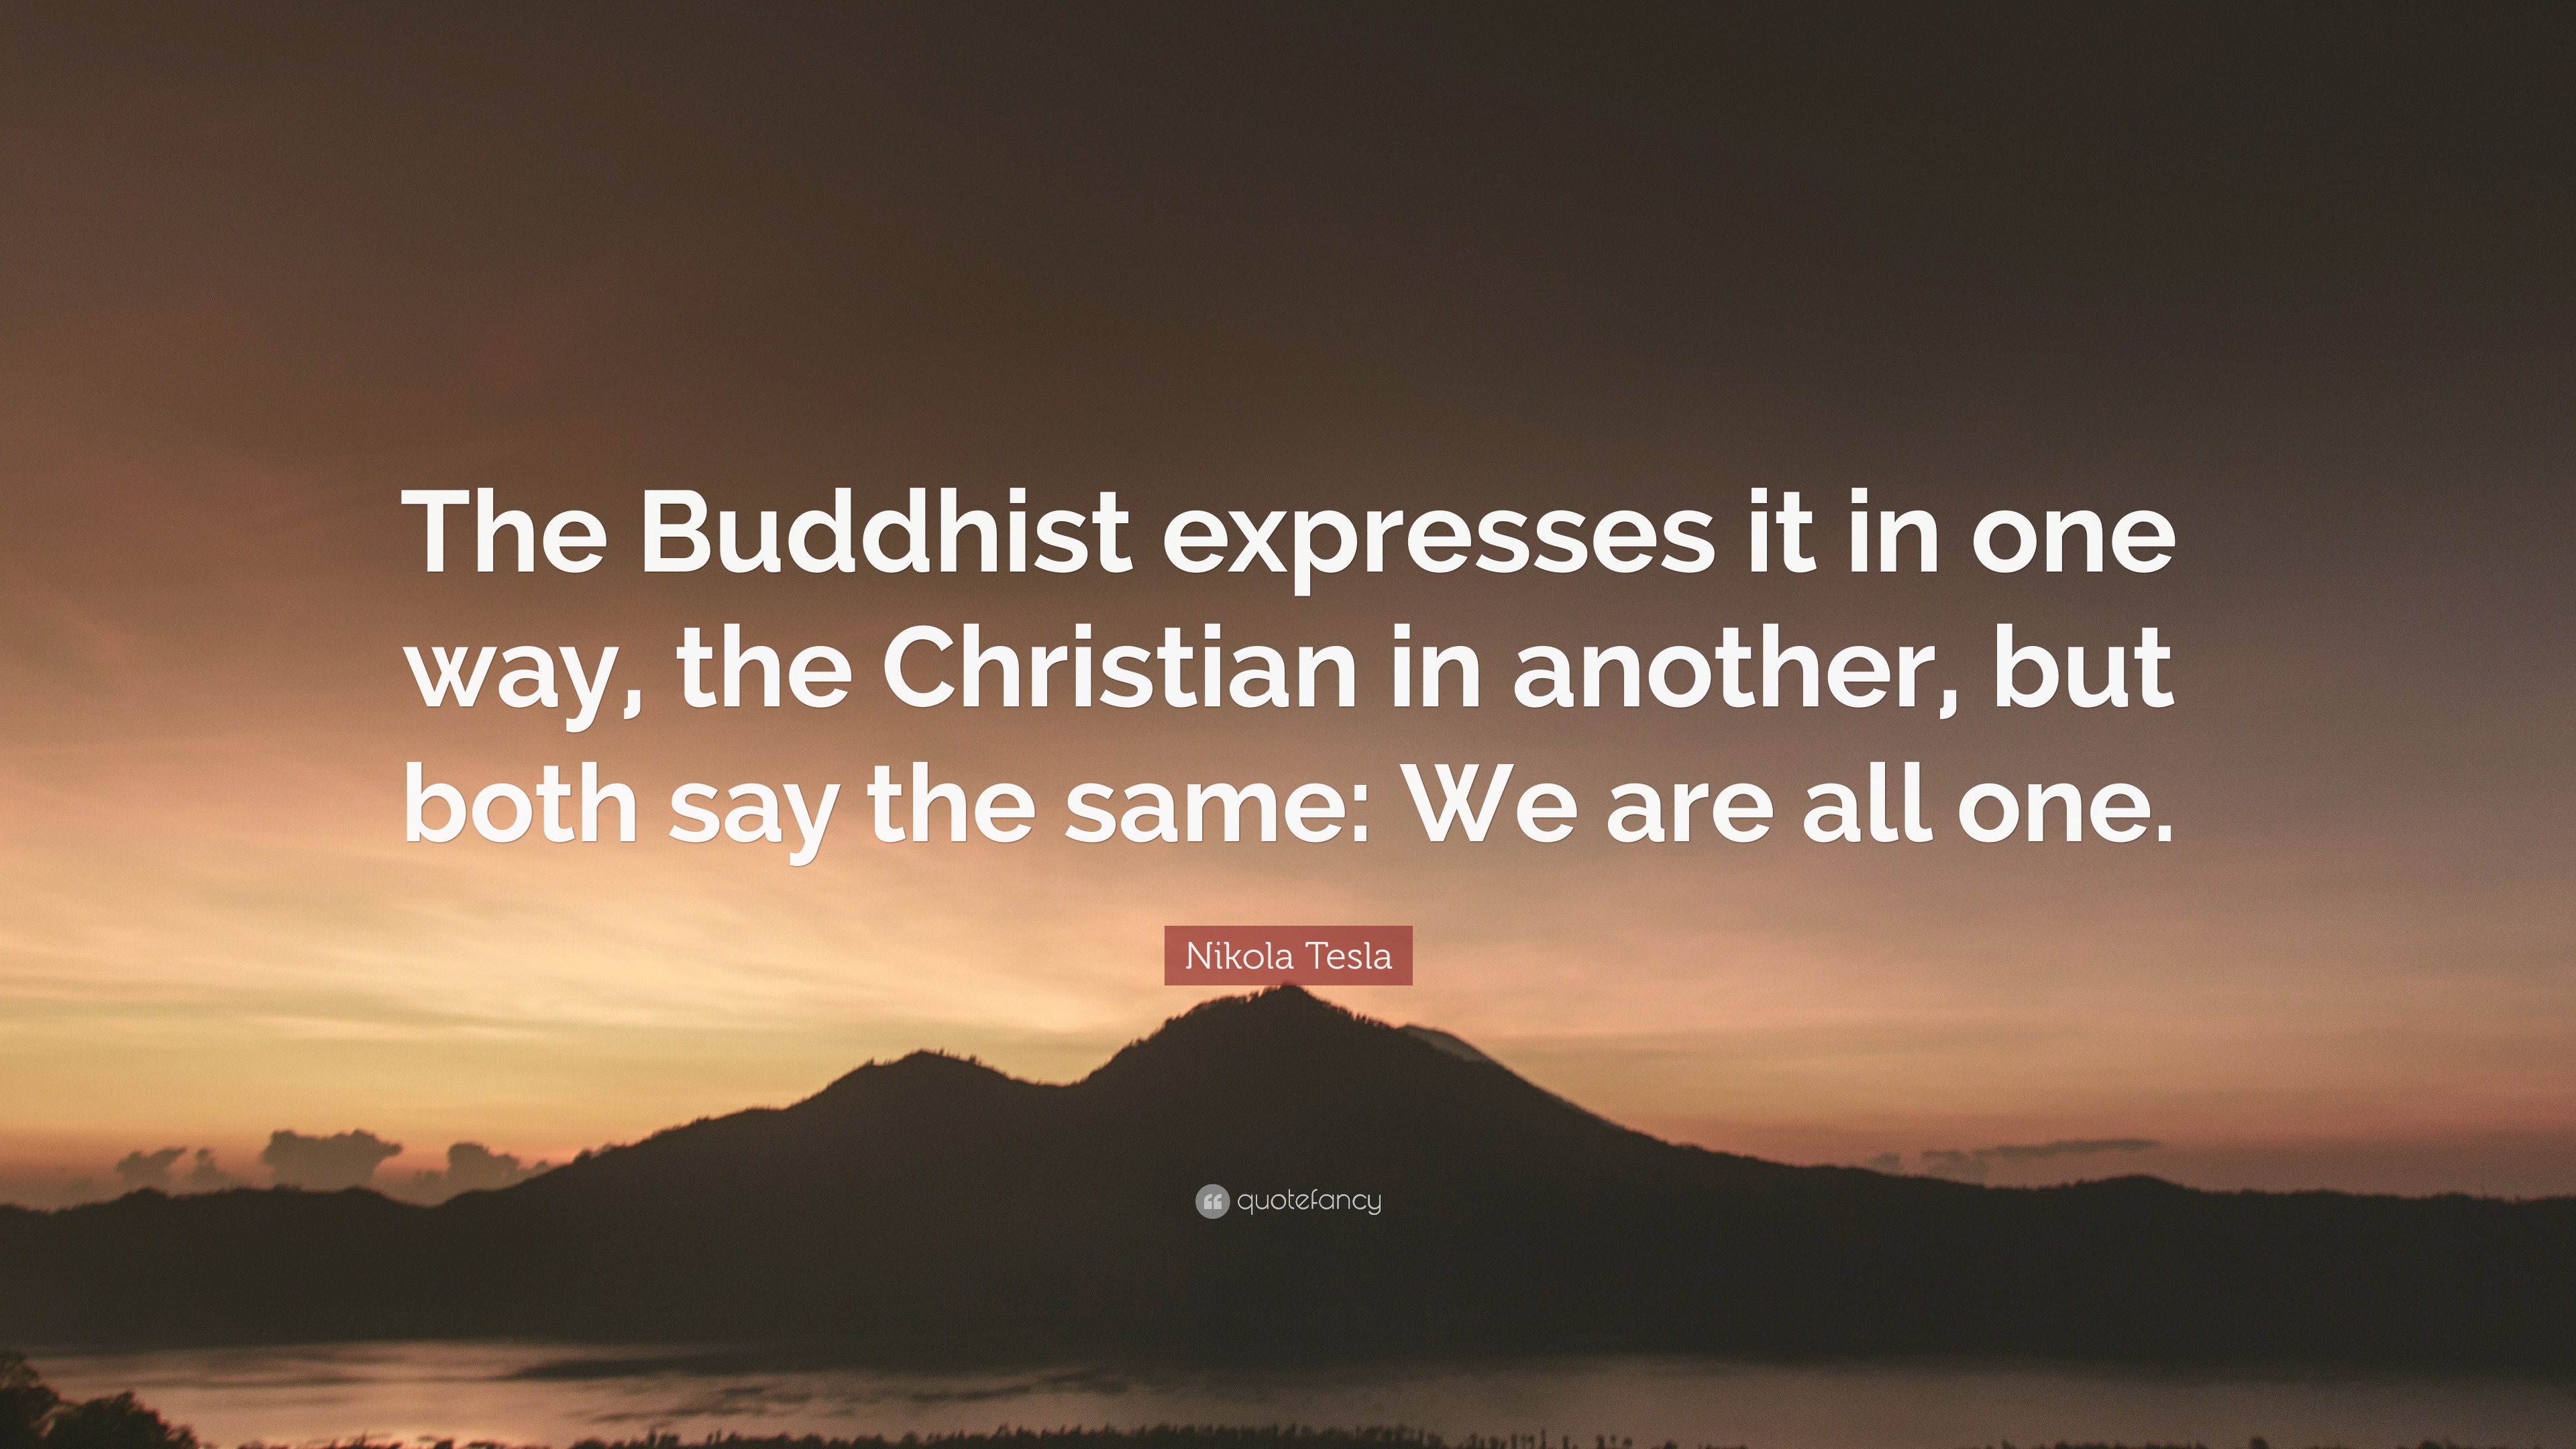 Nikola Tesla The Buddhist expresses it in one way the Christian in another but both say